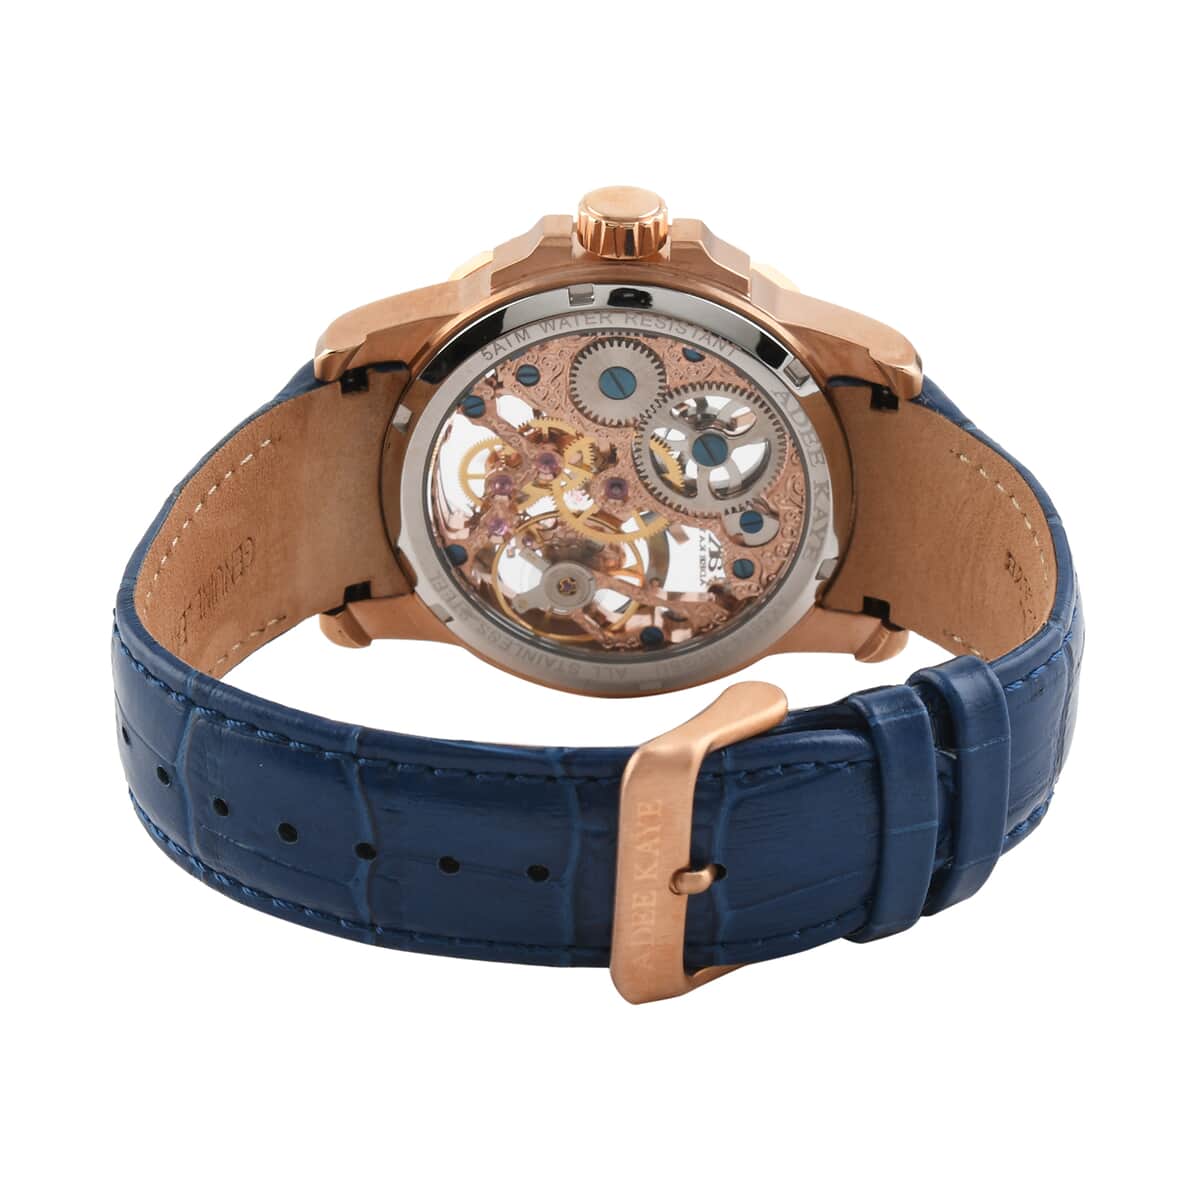 ADEE KAYE La Gear Mechanical Movement Watch with Genuine Leather Strap in Blue (48mm) image number 3